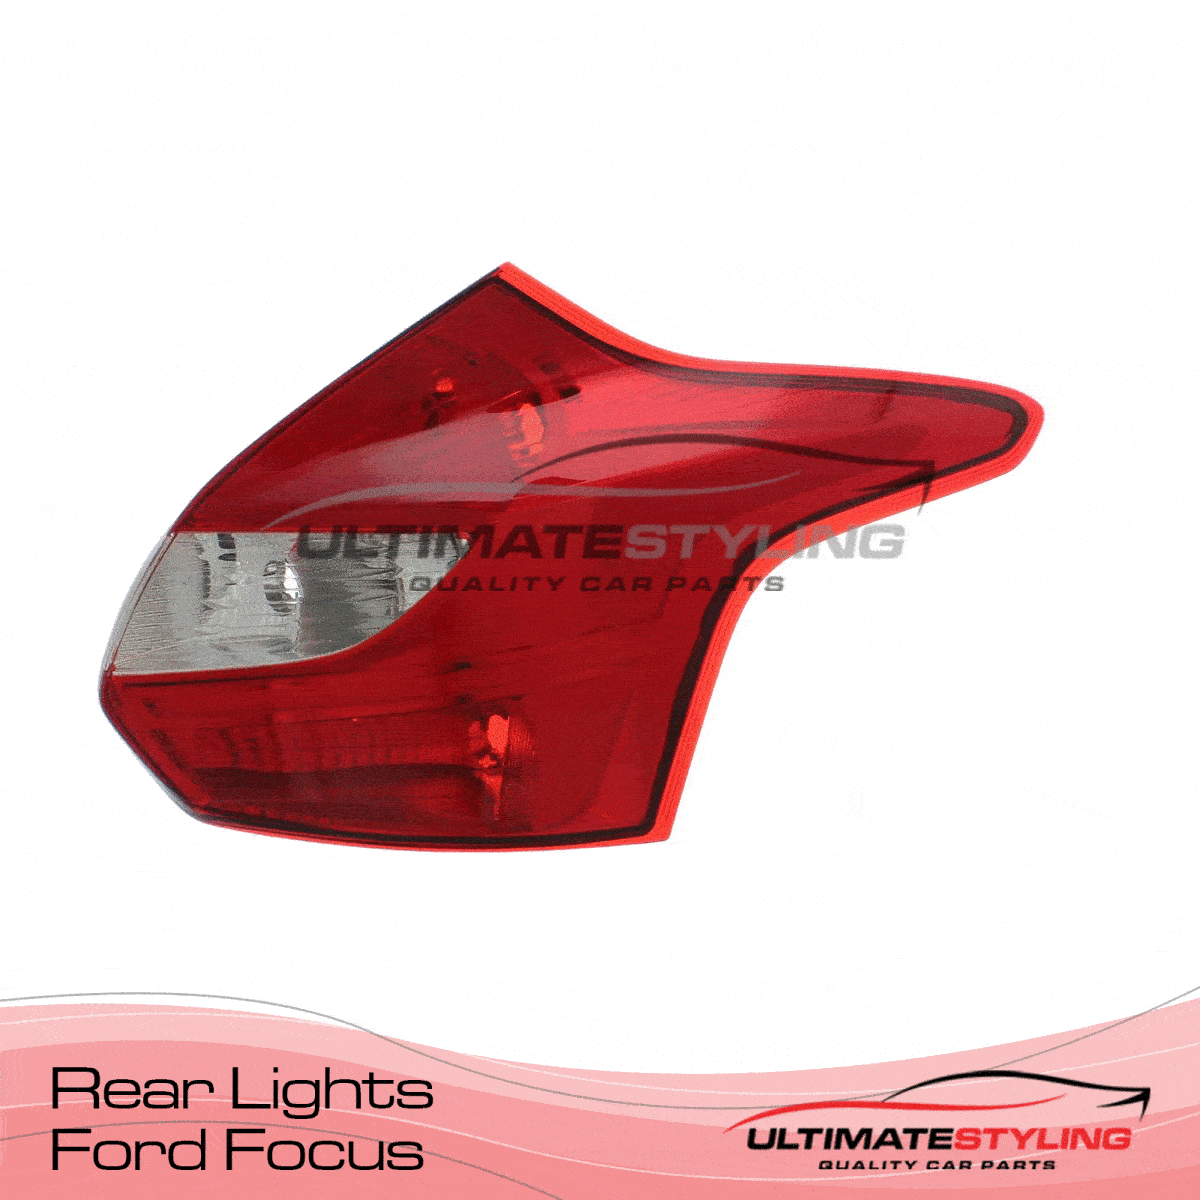 360 view of a Ford Focus Rear light